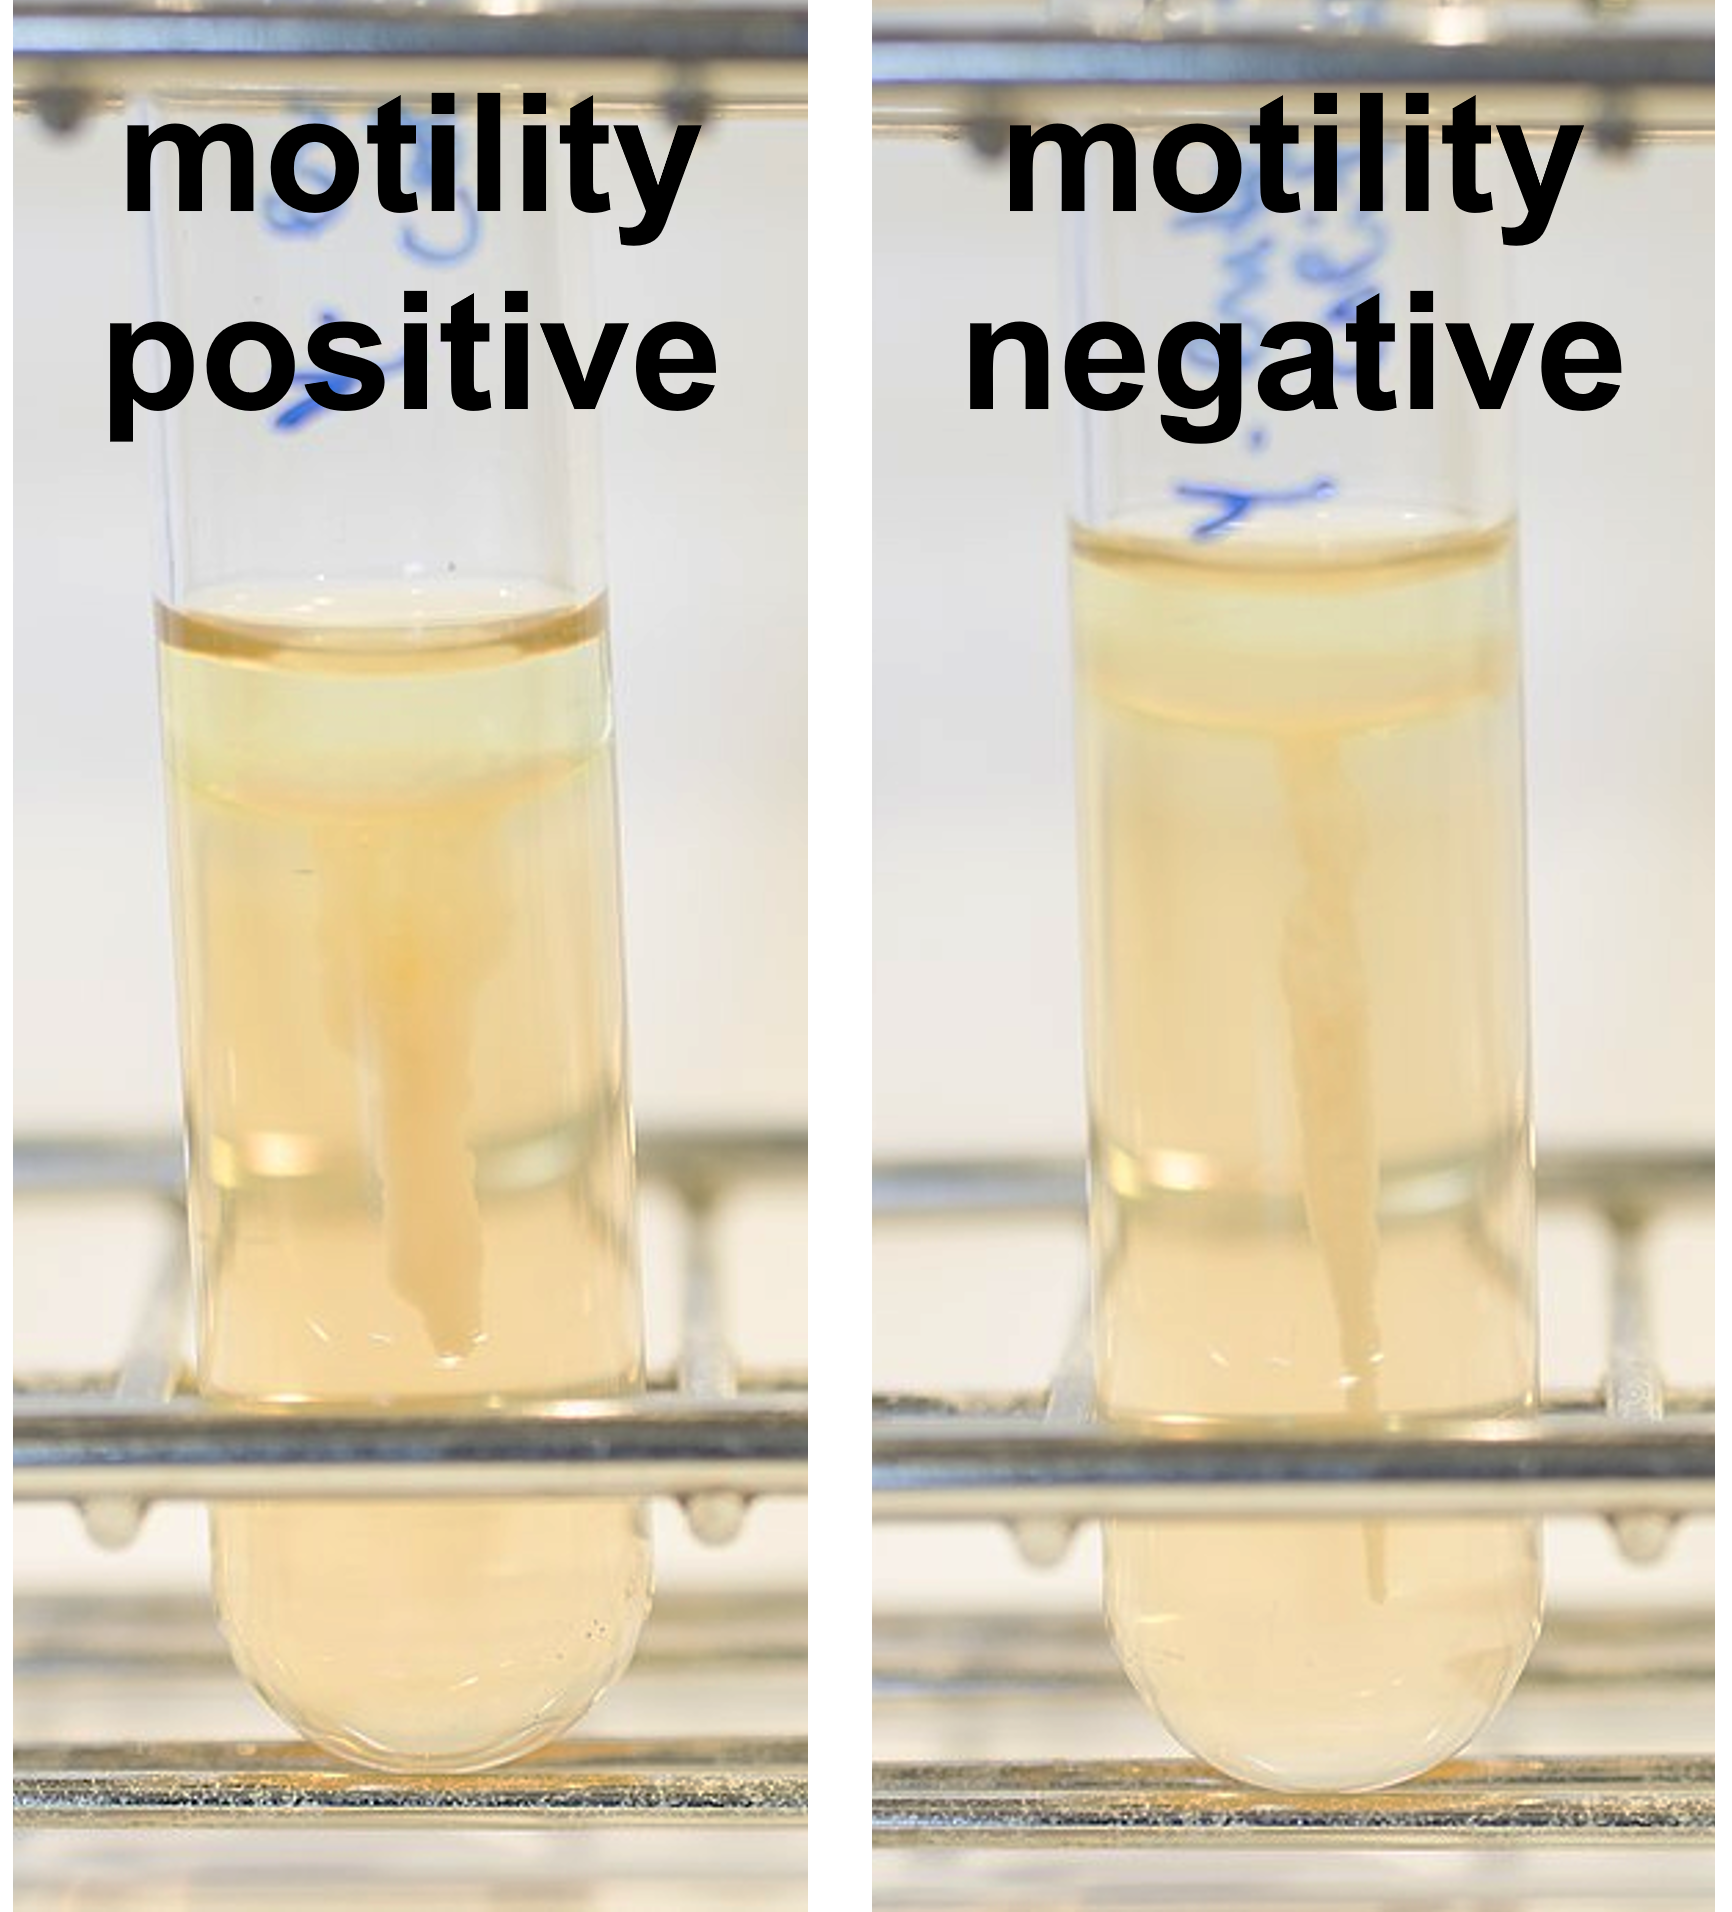 motility results in the SIM deep showing motility positive and motility negative results